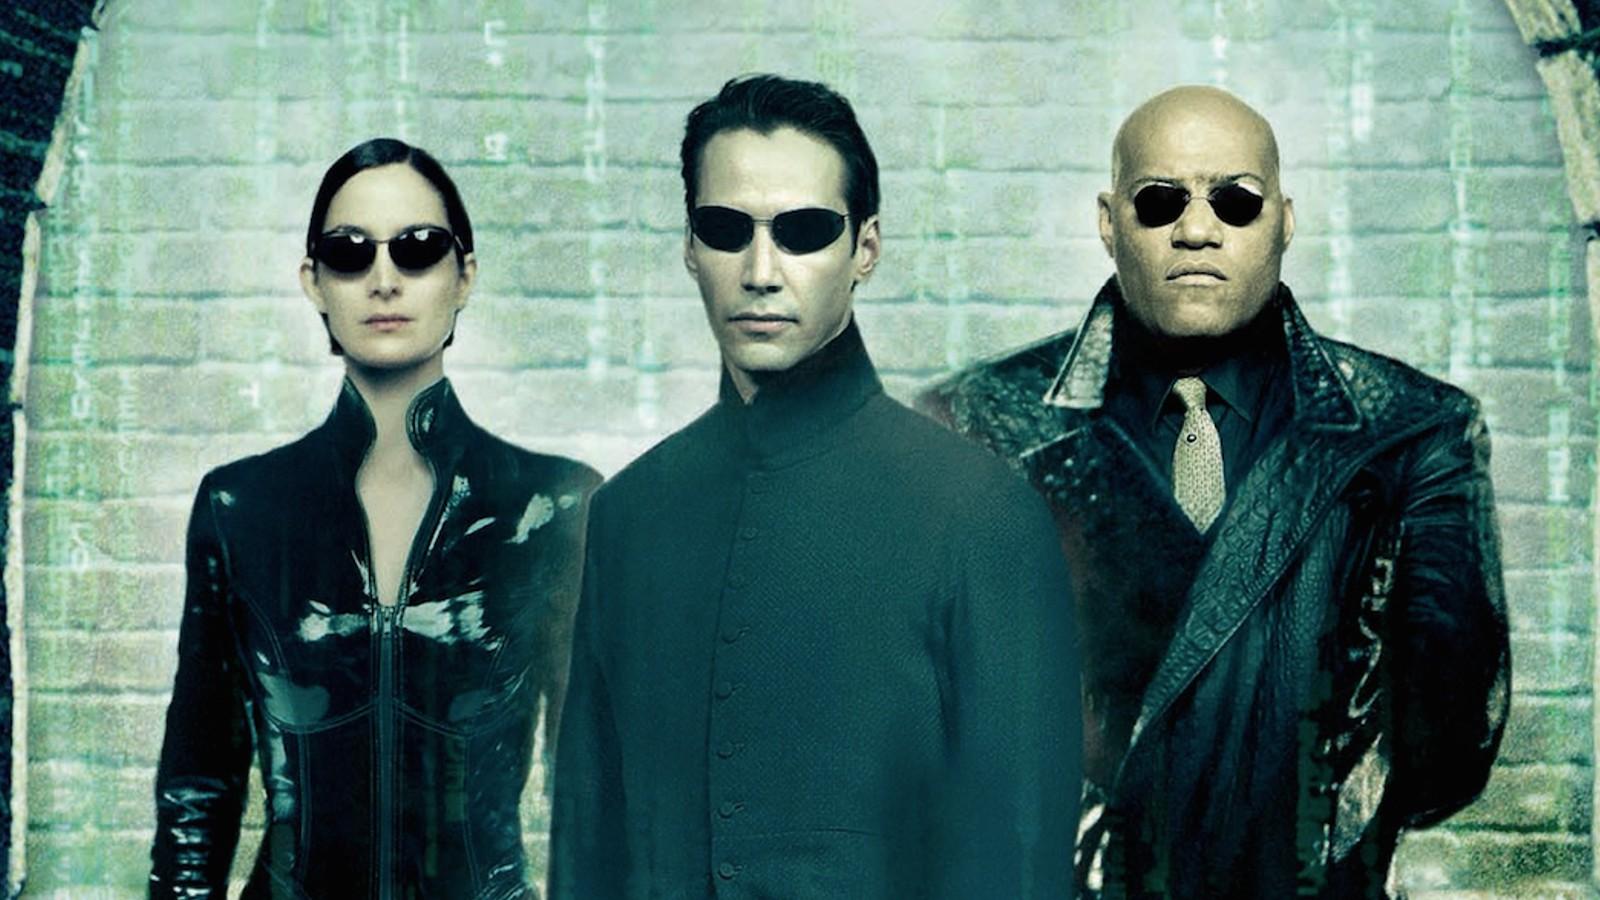 Keanu Reeves and the cast of The Matrix